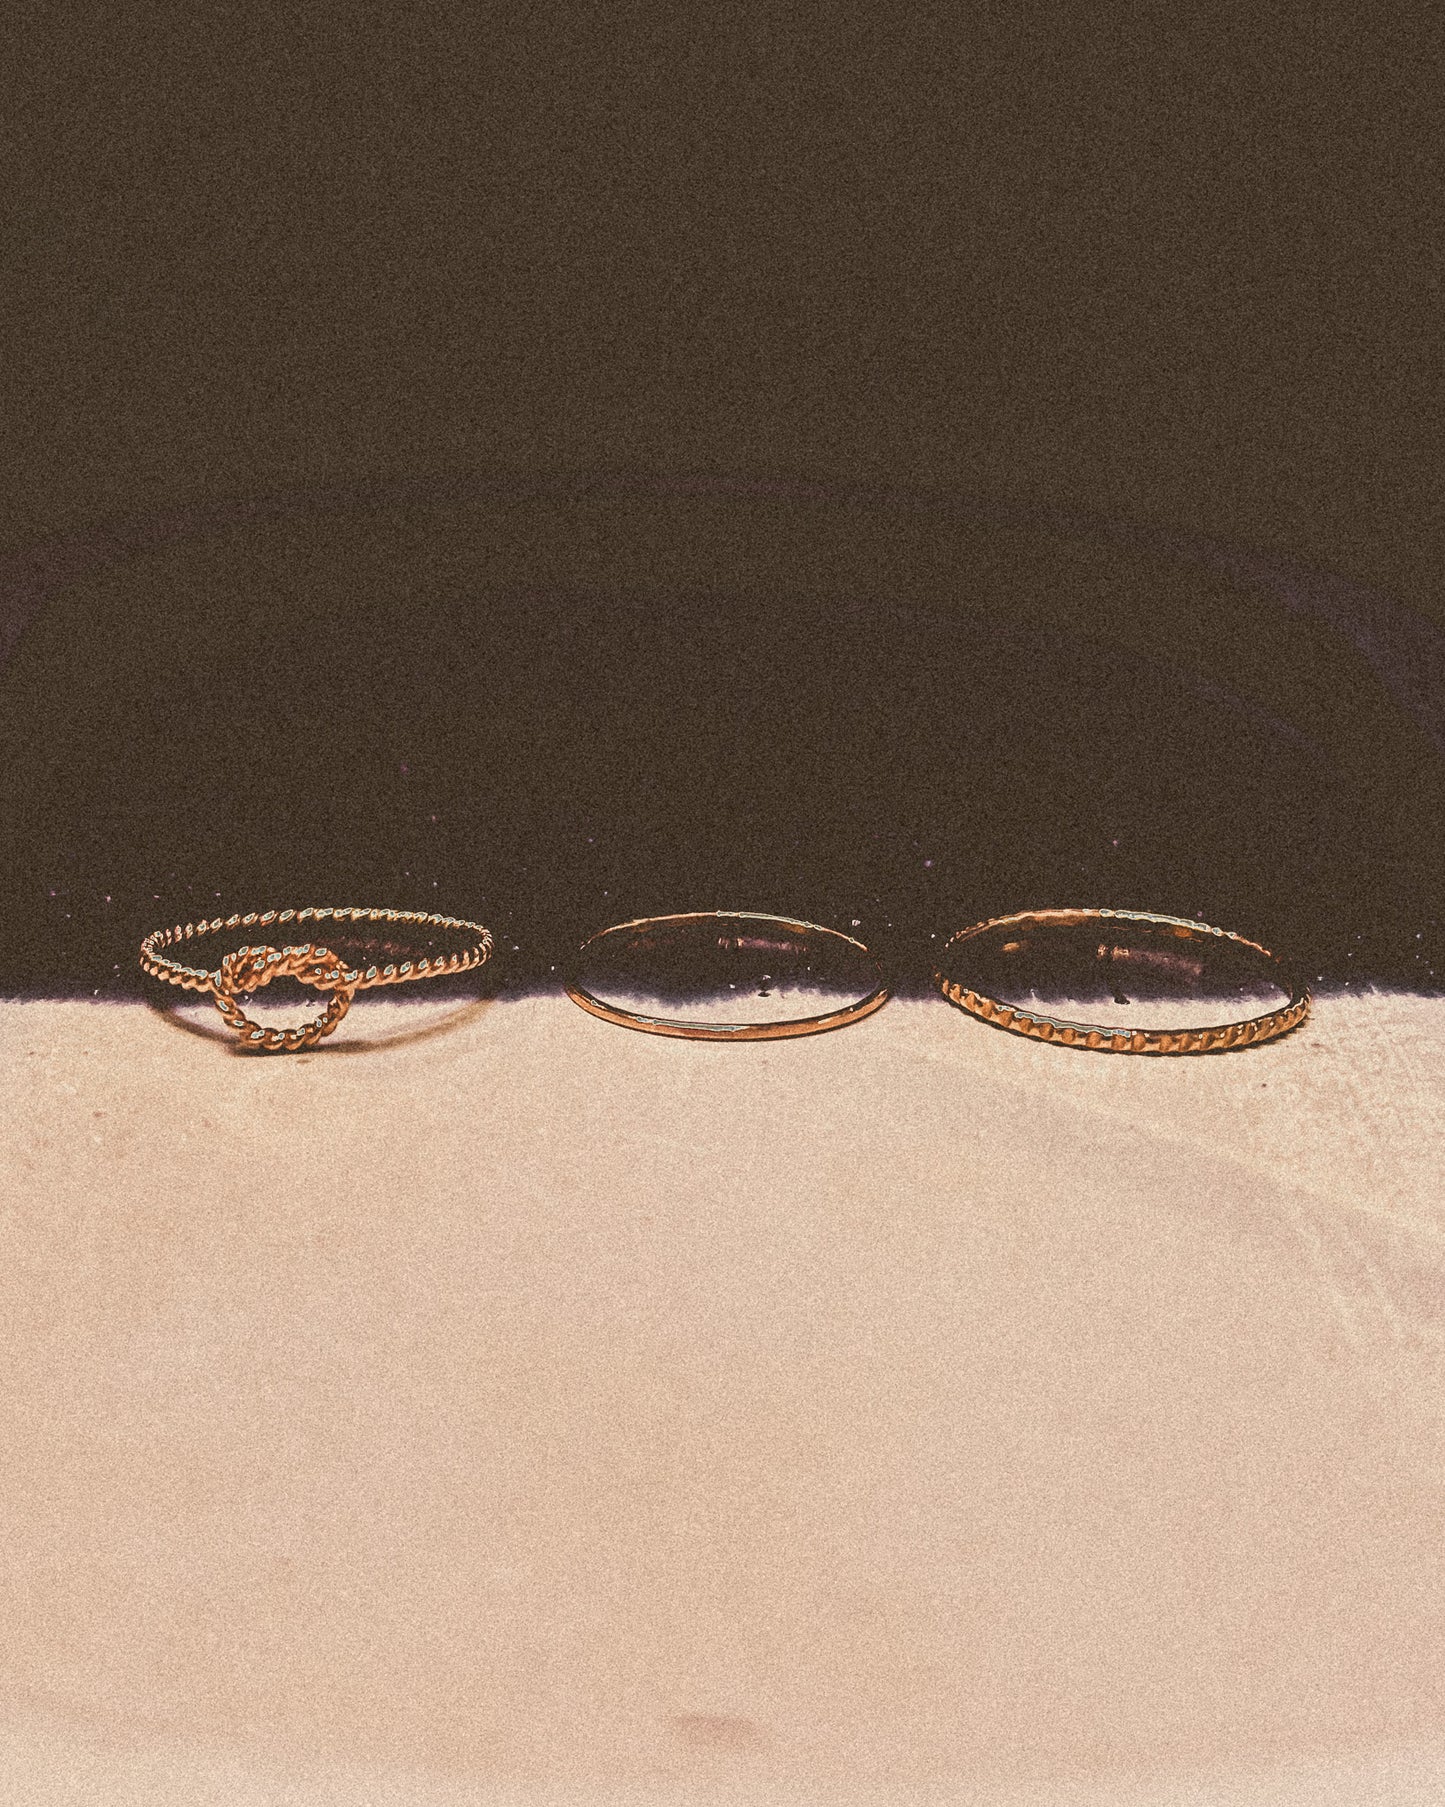 The Kasey Set of 3 Stacking Rings